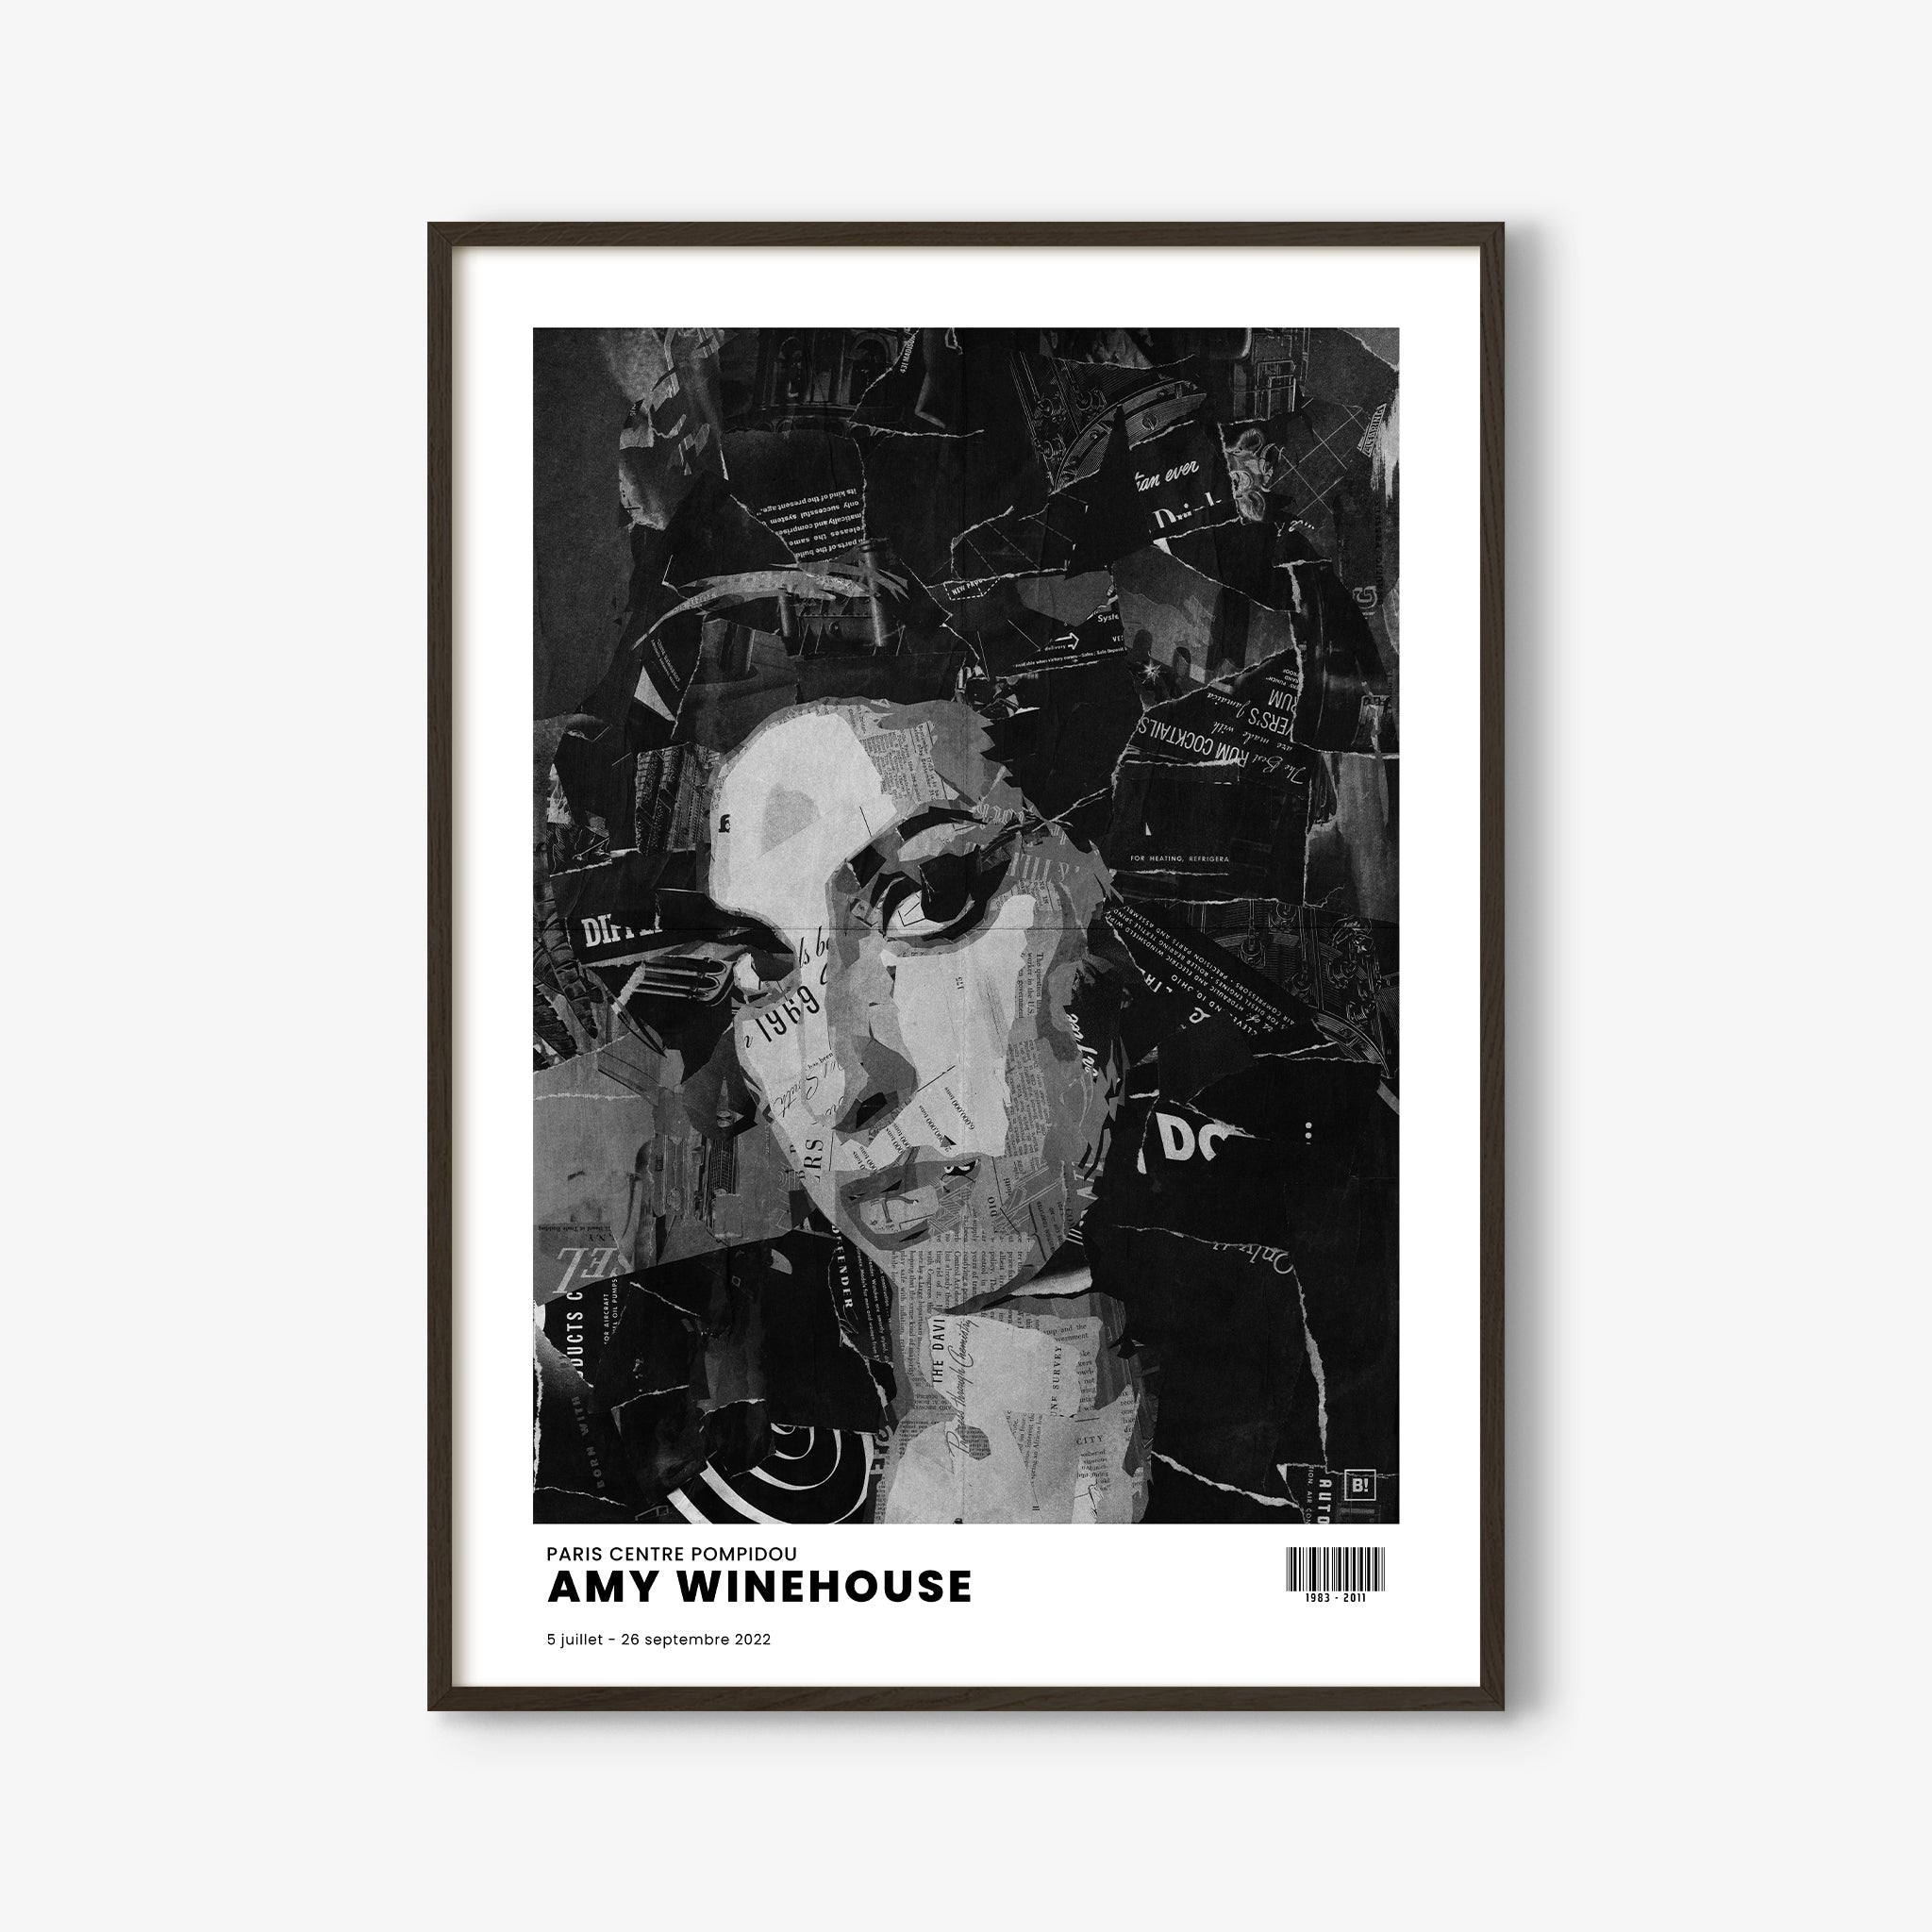 Be inspired by Iconic Amy Winehouse Paris Centre Pompidou Exhibition Art Print. The artwork is presented in a black oak frame that captures its timeless beauty in every detail.